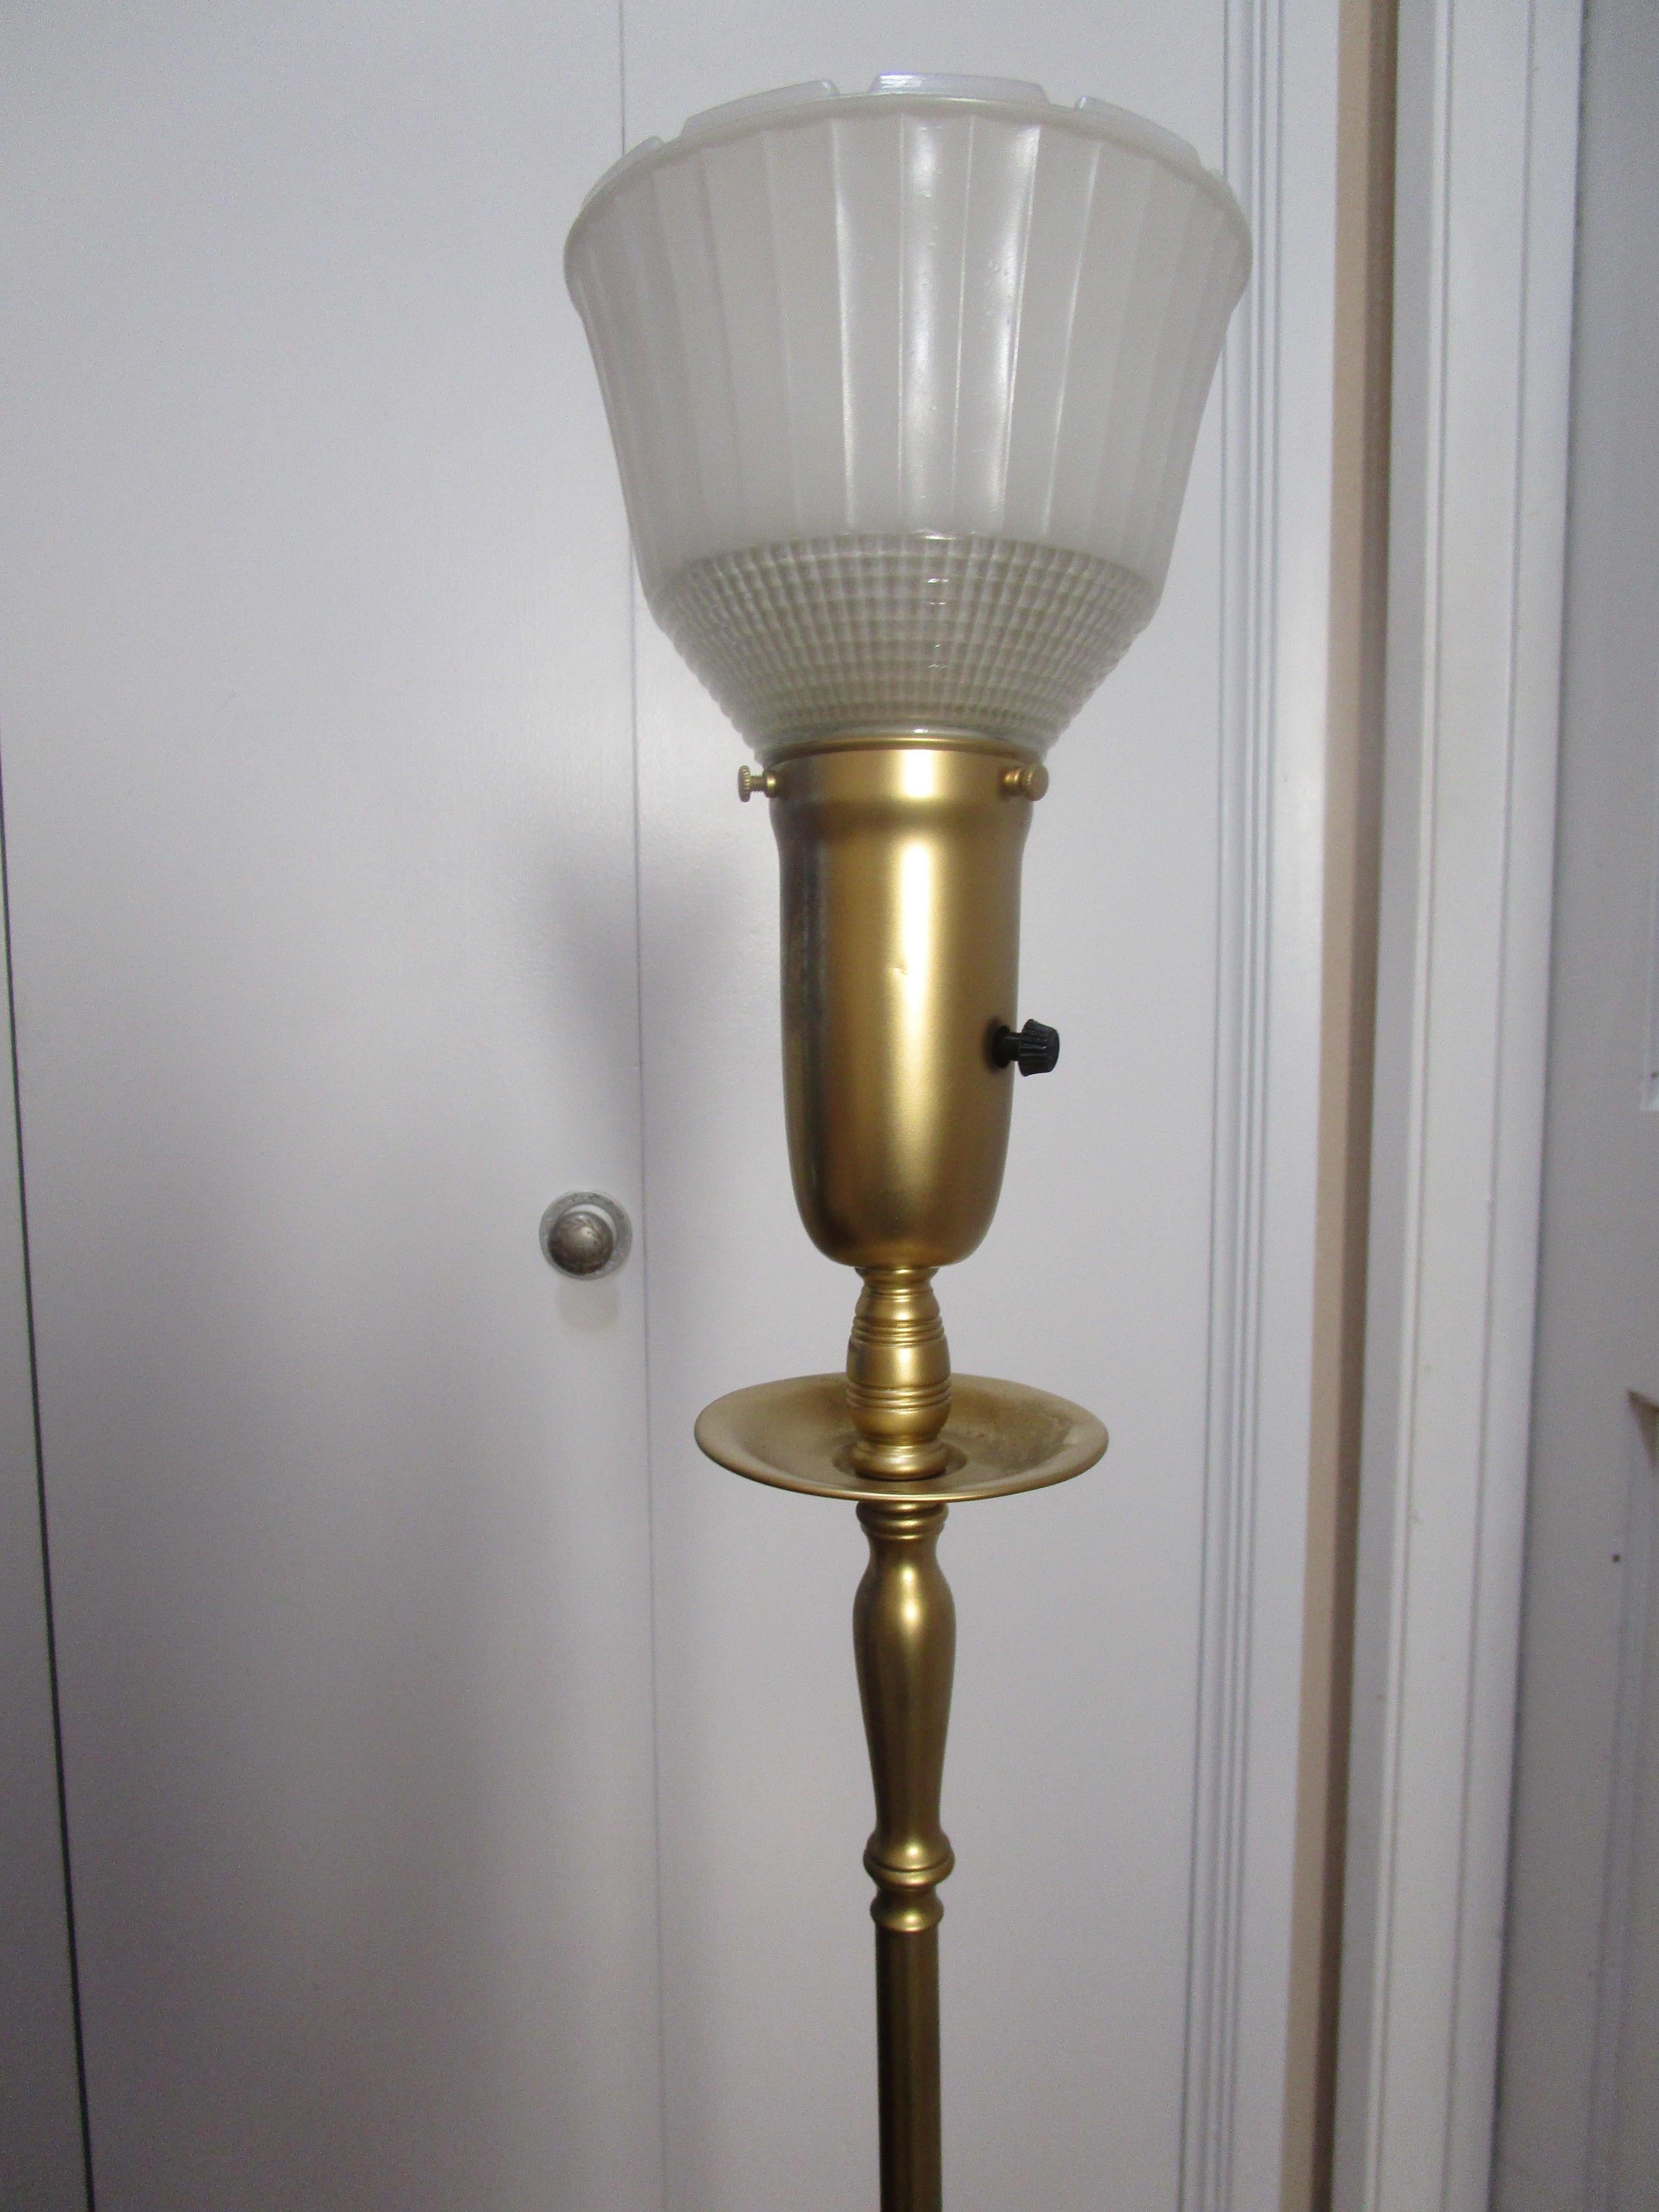 A mid-century modern Stiffel lamp is perfectly balanced on a square base that has four little ball feet. It has most of the weight in the base. It emits a soft light through the torchiere shade. It is on a two-way switch. The lamp is functional and